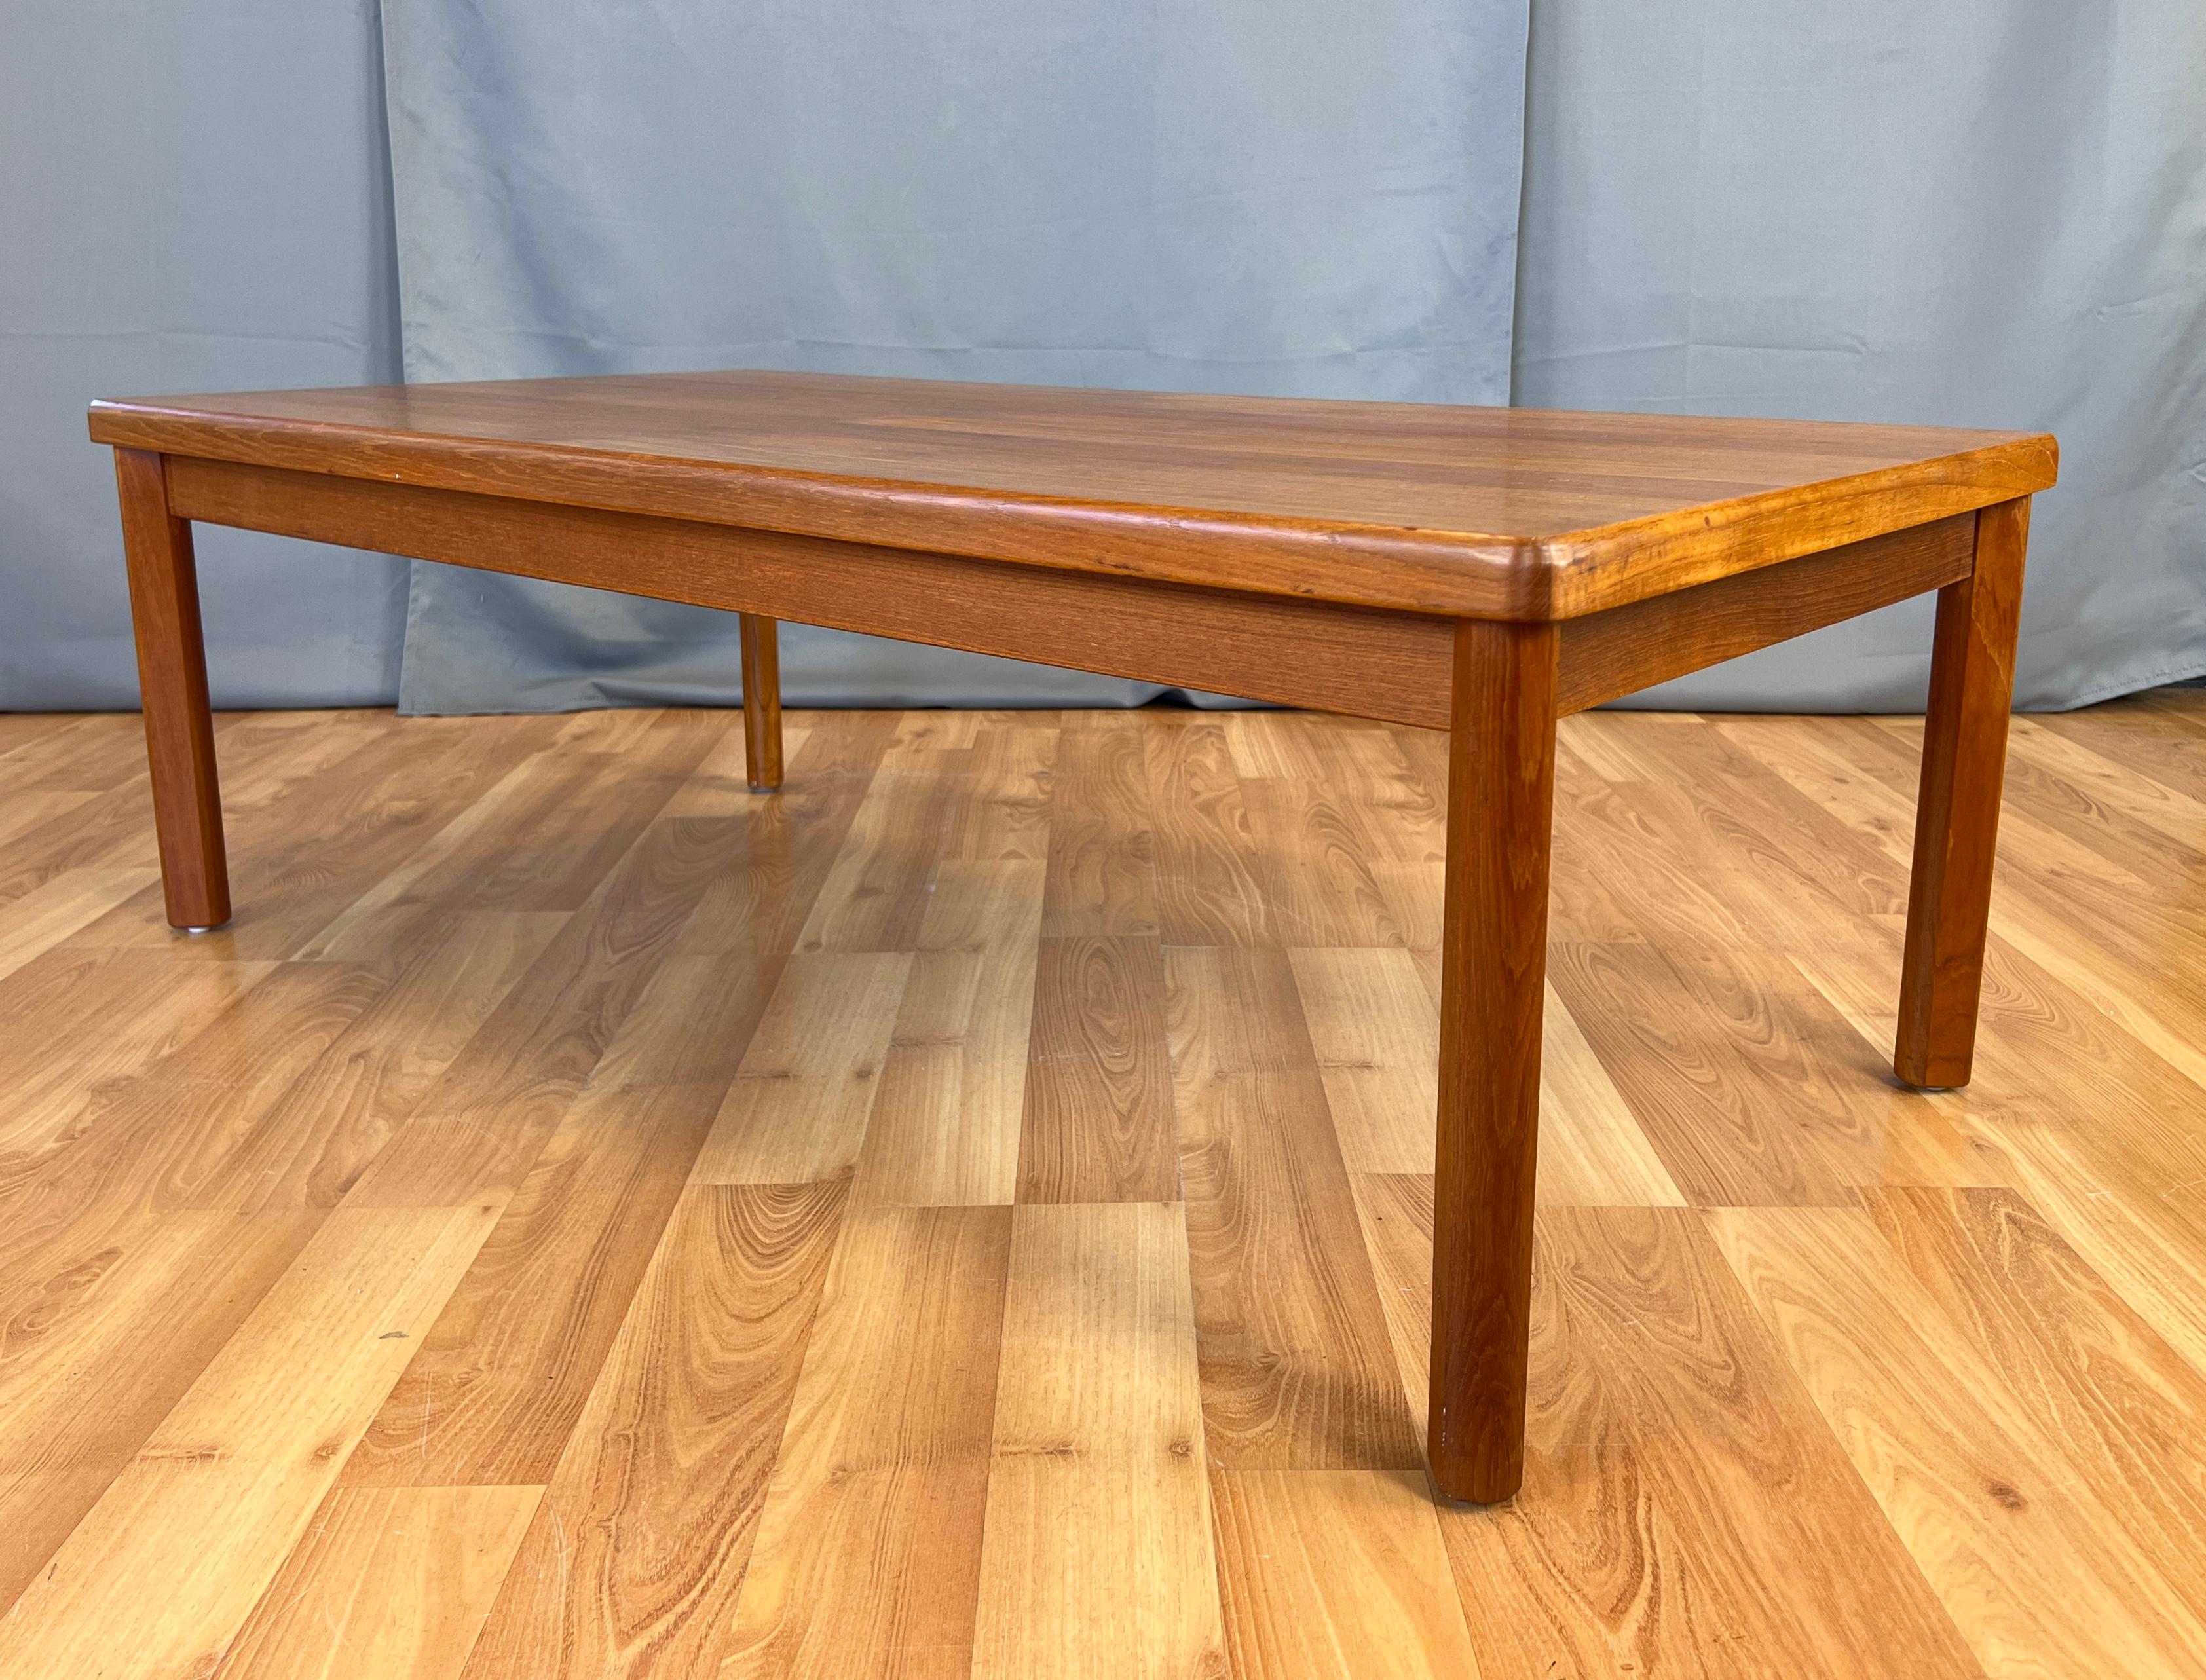 A simple clean design this Danish modern coffee/cocktail table has. 
Solid teak legs and edges, it's a nice size, you could say it's just right.